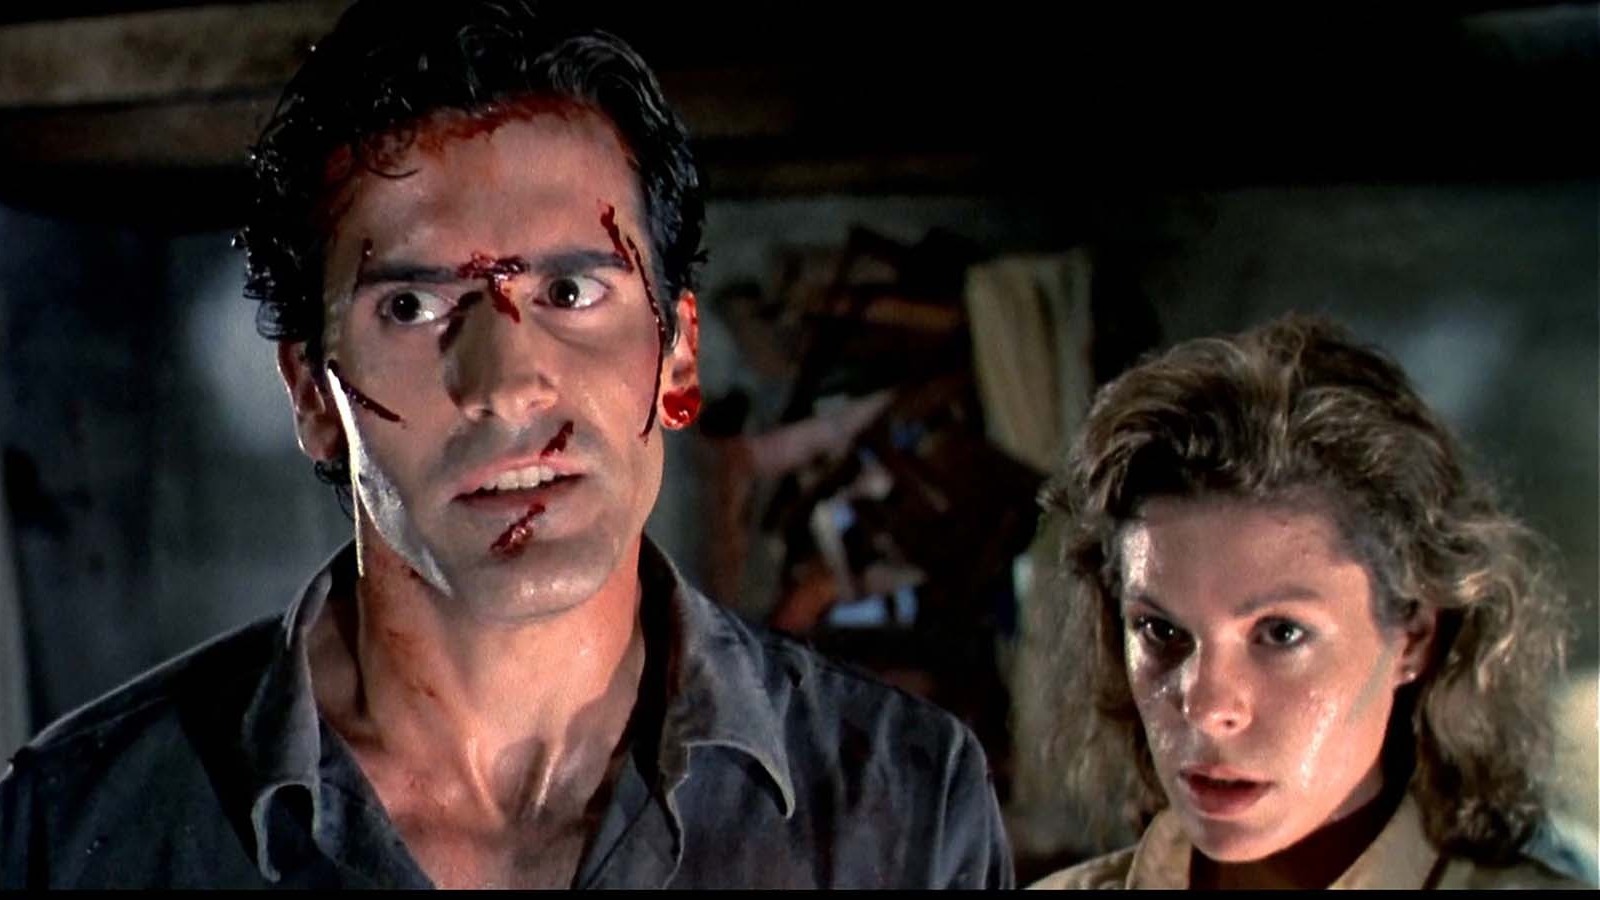 The Evil Dead Remains an Exceptionally Playful Exploitation Film